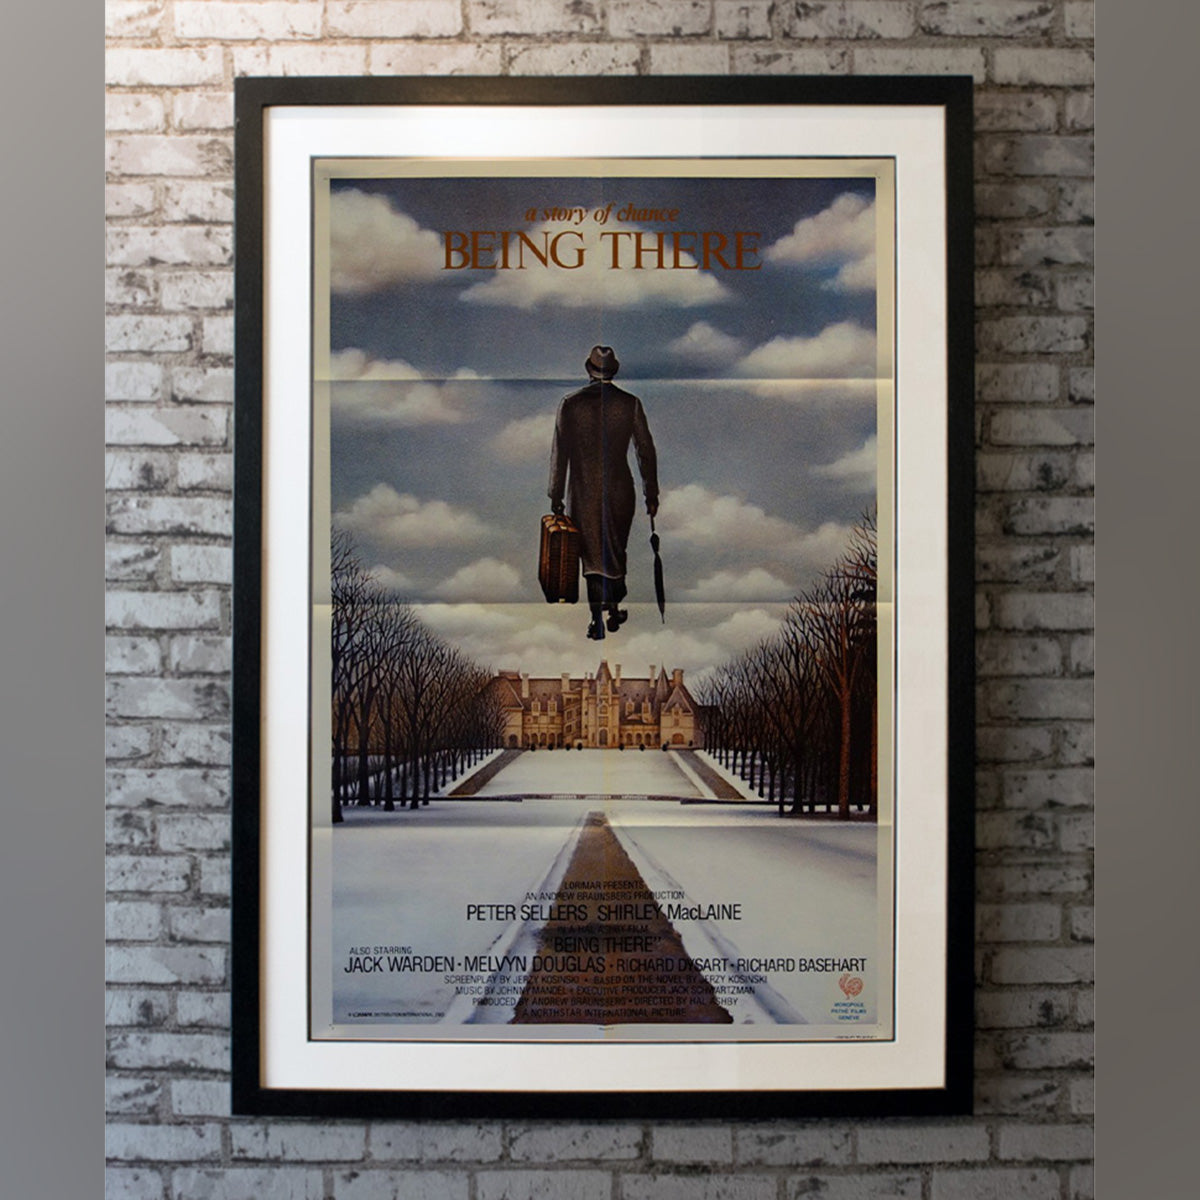 Original Movie Poster of Being There (1979)